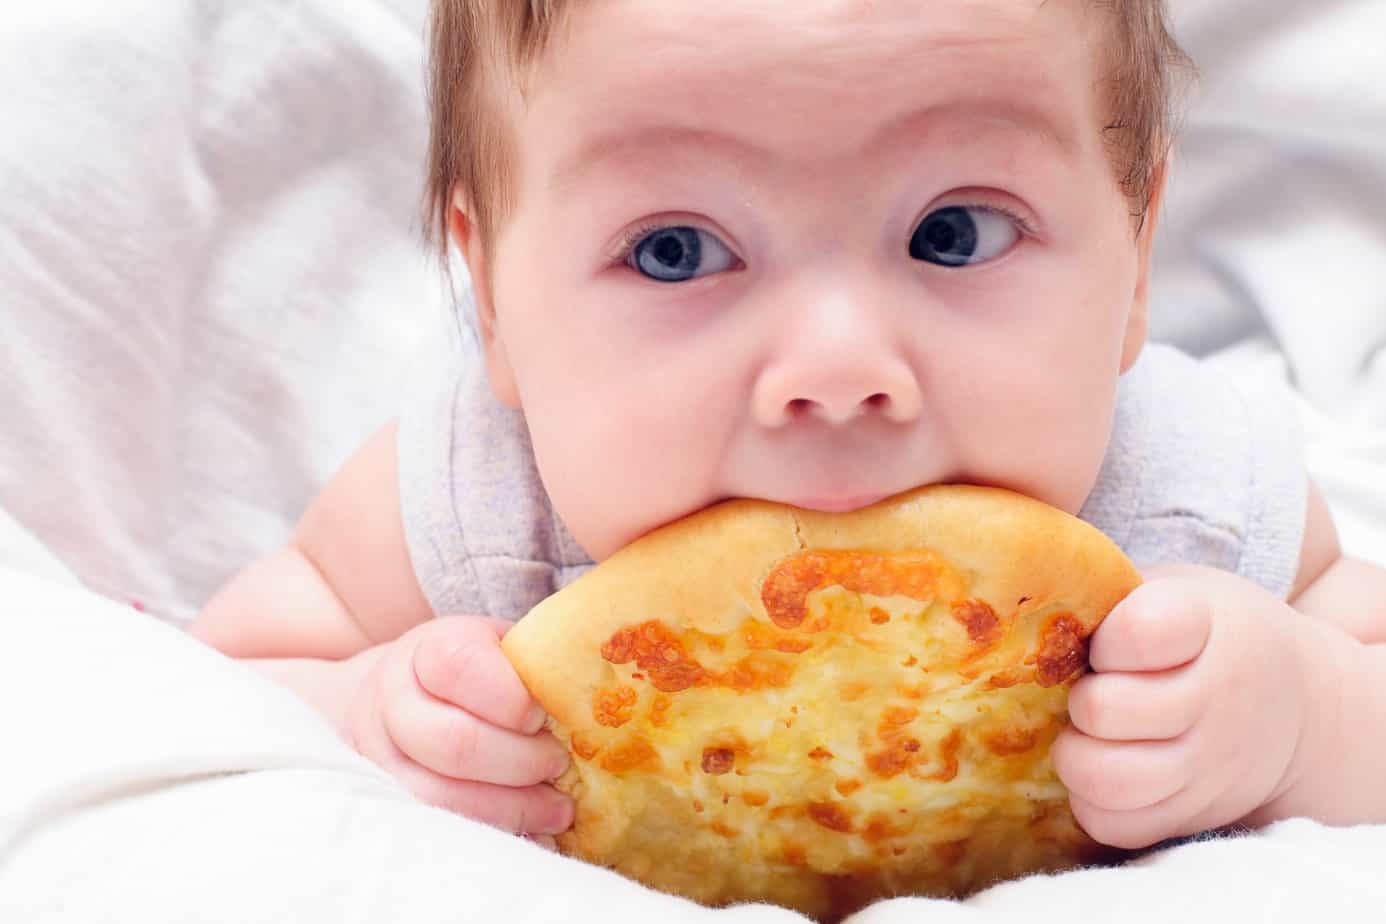 When Can Babies Eat Pizza Crust?